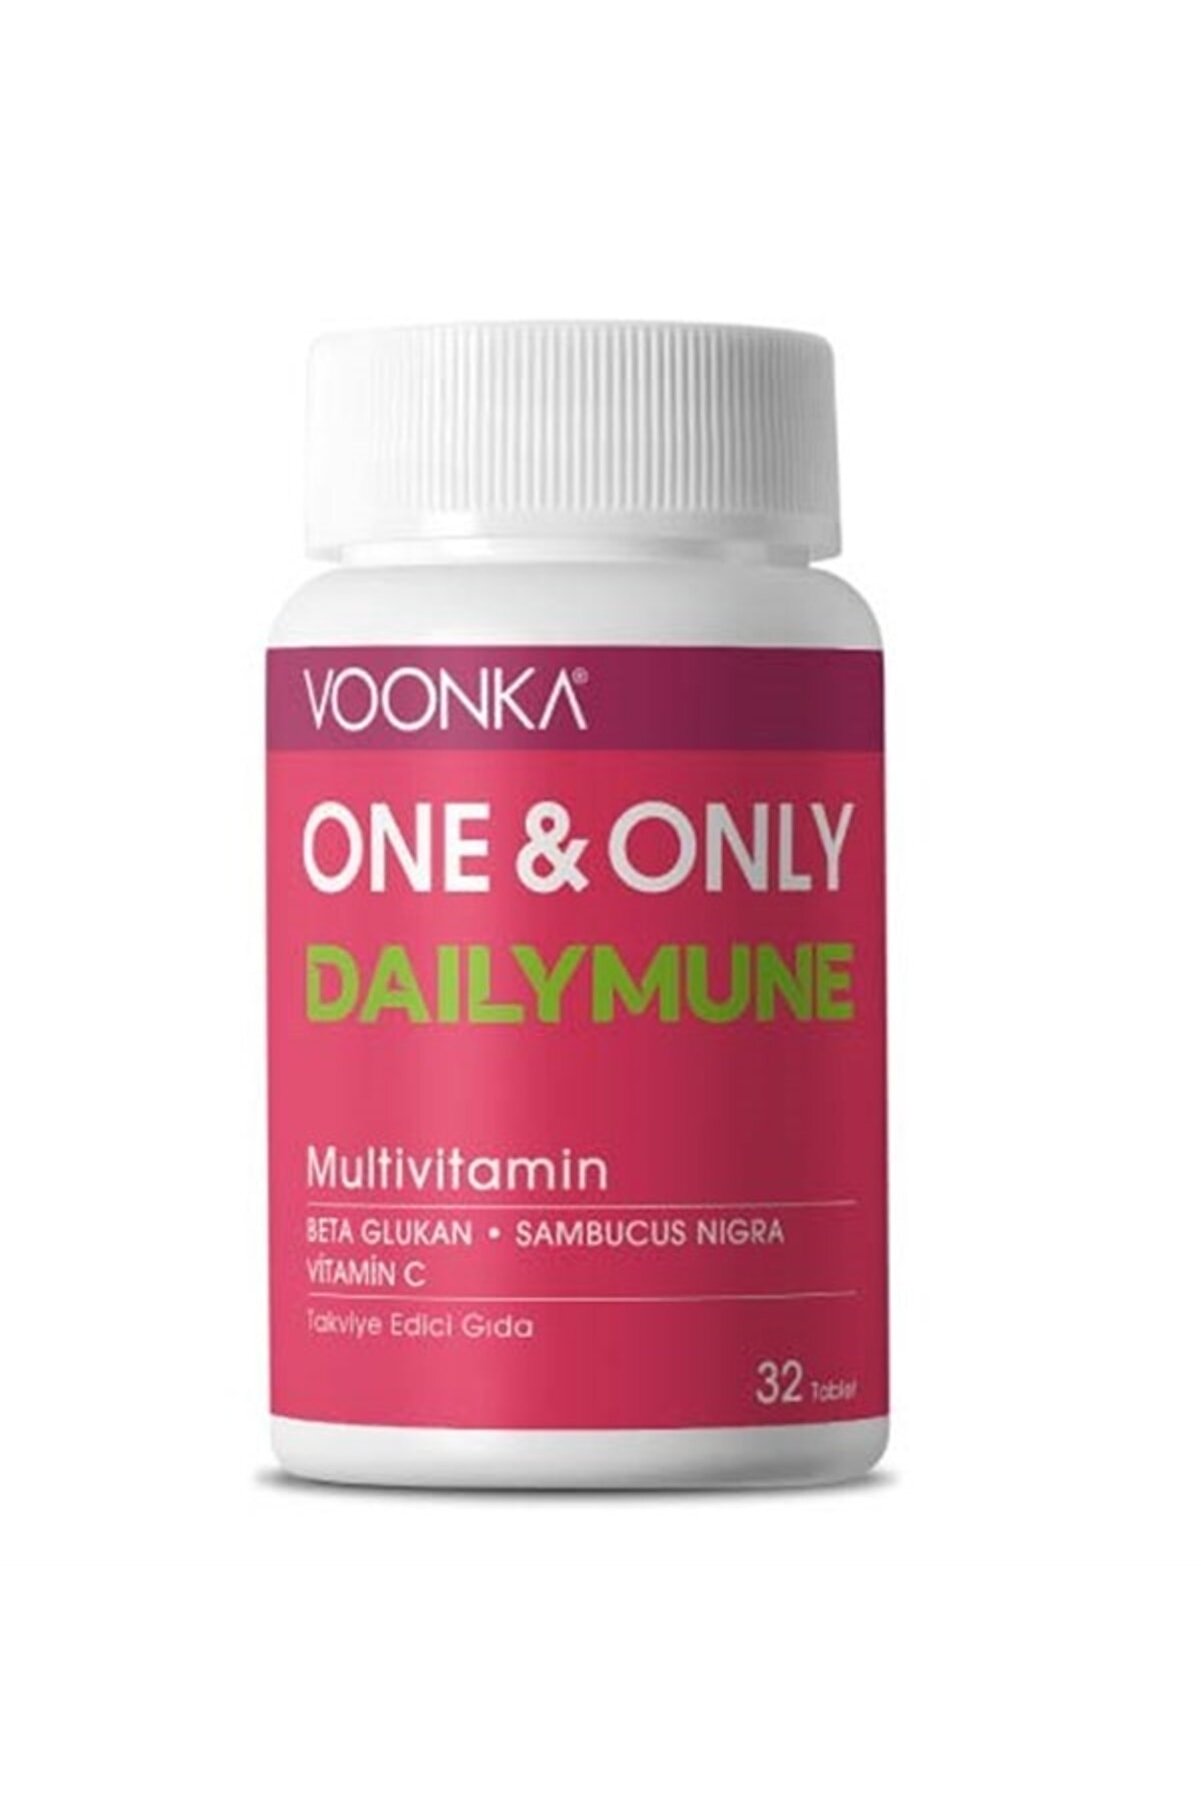 Voonka One And Only Dailymune Multivitamin 32 Tablet